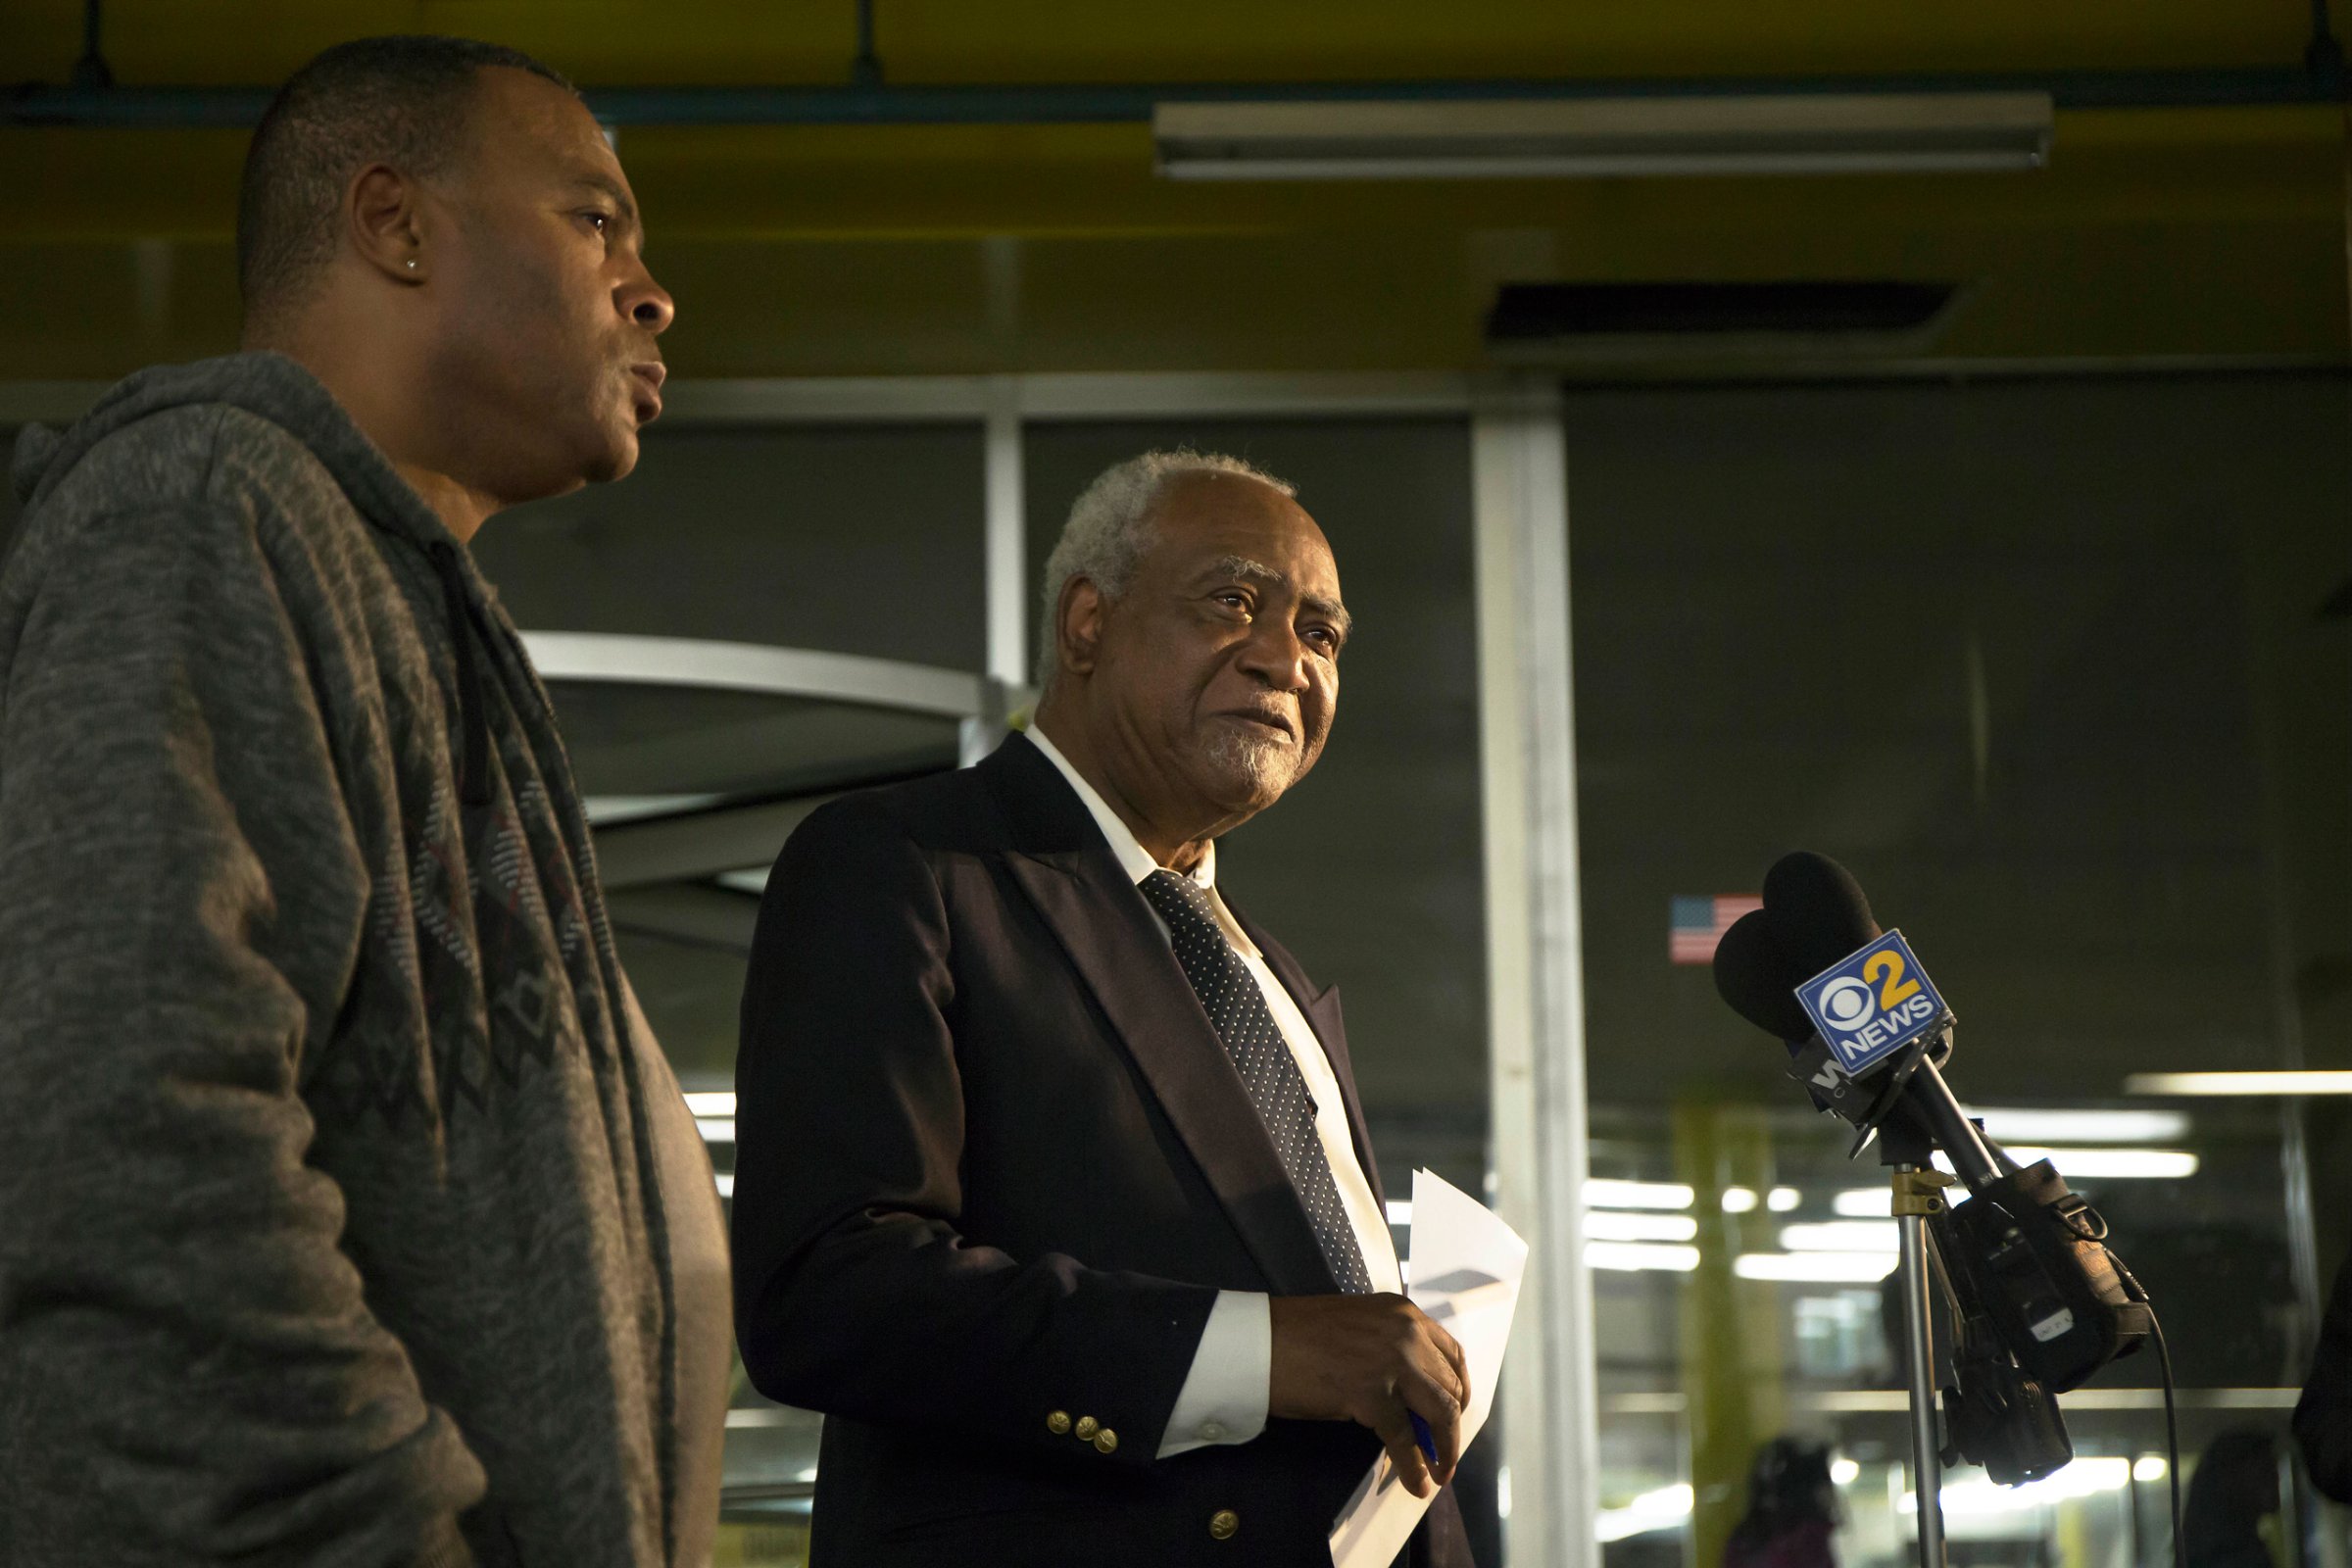 In this Friday, Nov. 18, 2016 photo, U.S. Rep. Danny Davis, D-Ill., center, and his son, Stacey Wilson, give a news conference at the 5th District police department in the Englewood neighborhood of Chicago. Fifteen-year-old Javon Wilson, the grandson of Danny Davis and son of Stacey Wilson, was shot and killed Friday evening. Javon was a sophomore at Perspective high school. (Alyssa Pointer/Chicago Tribune via AP)